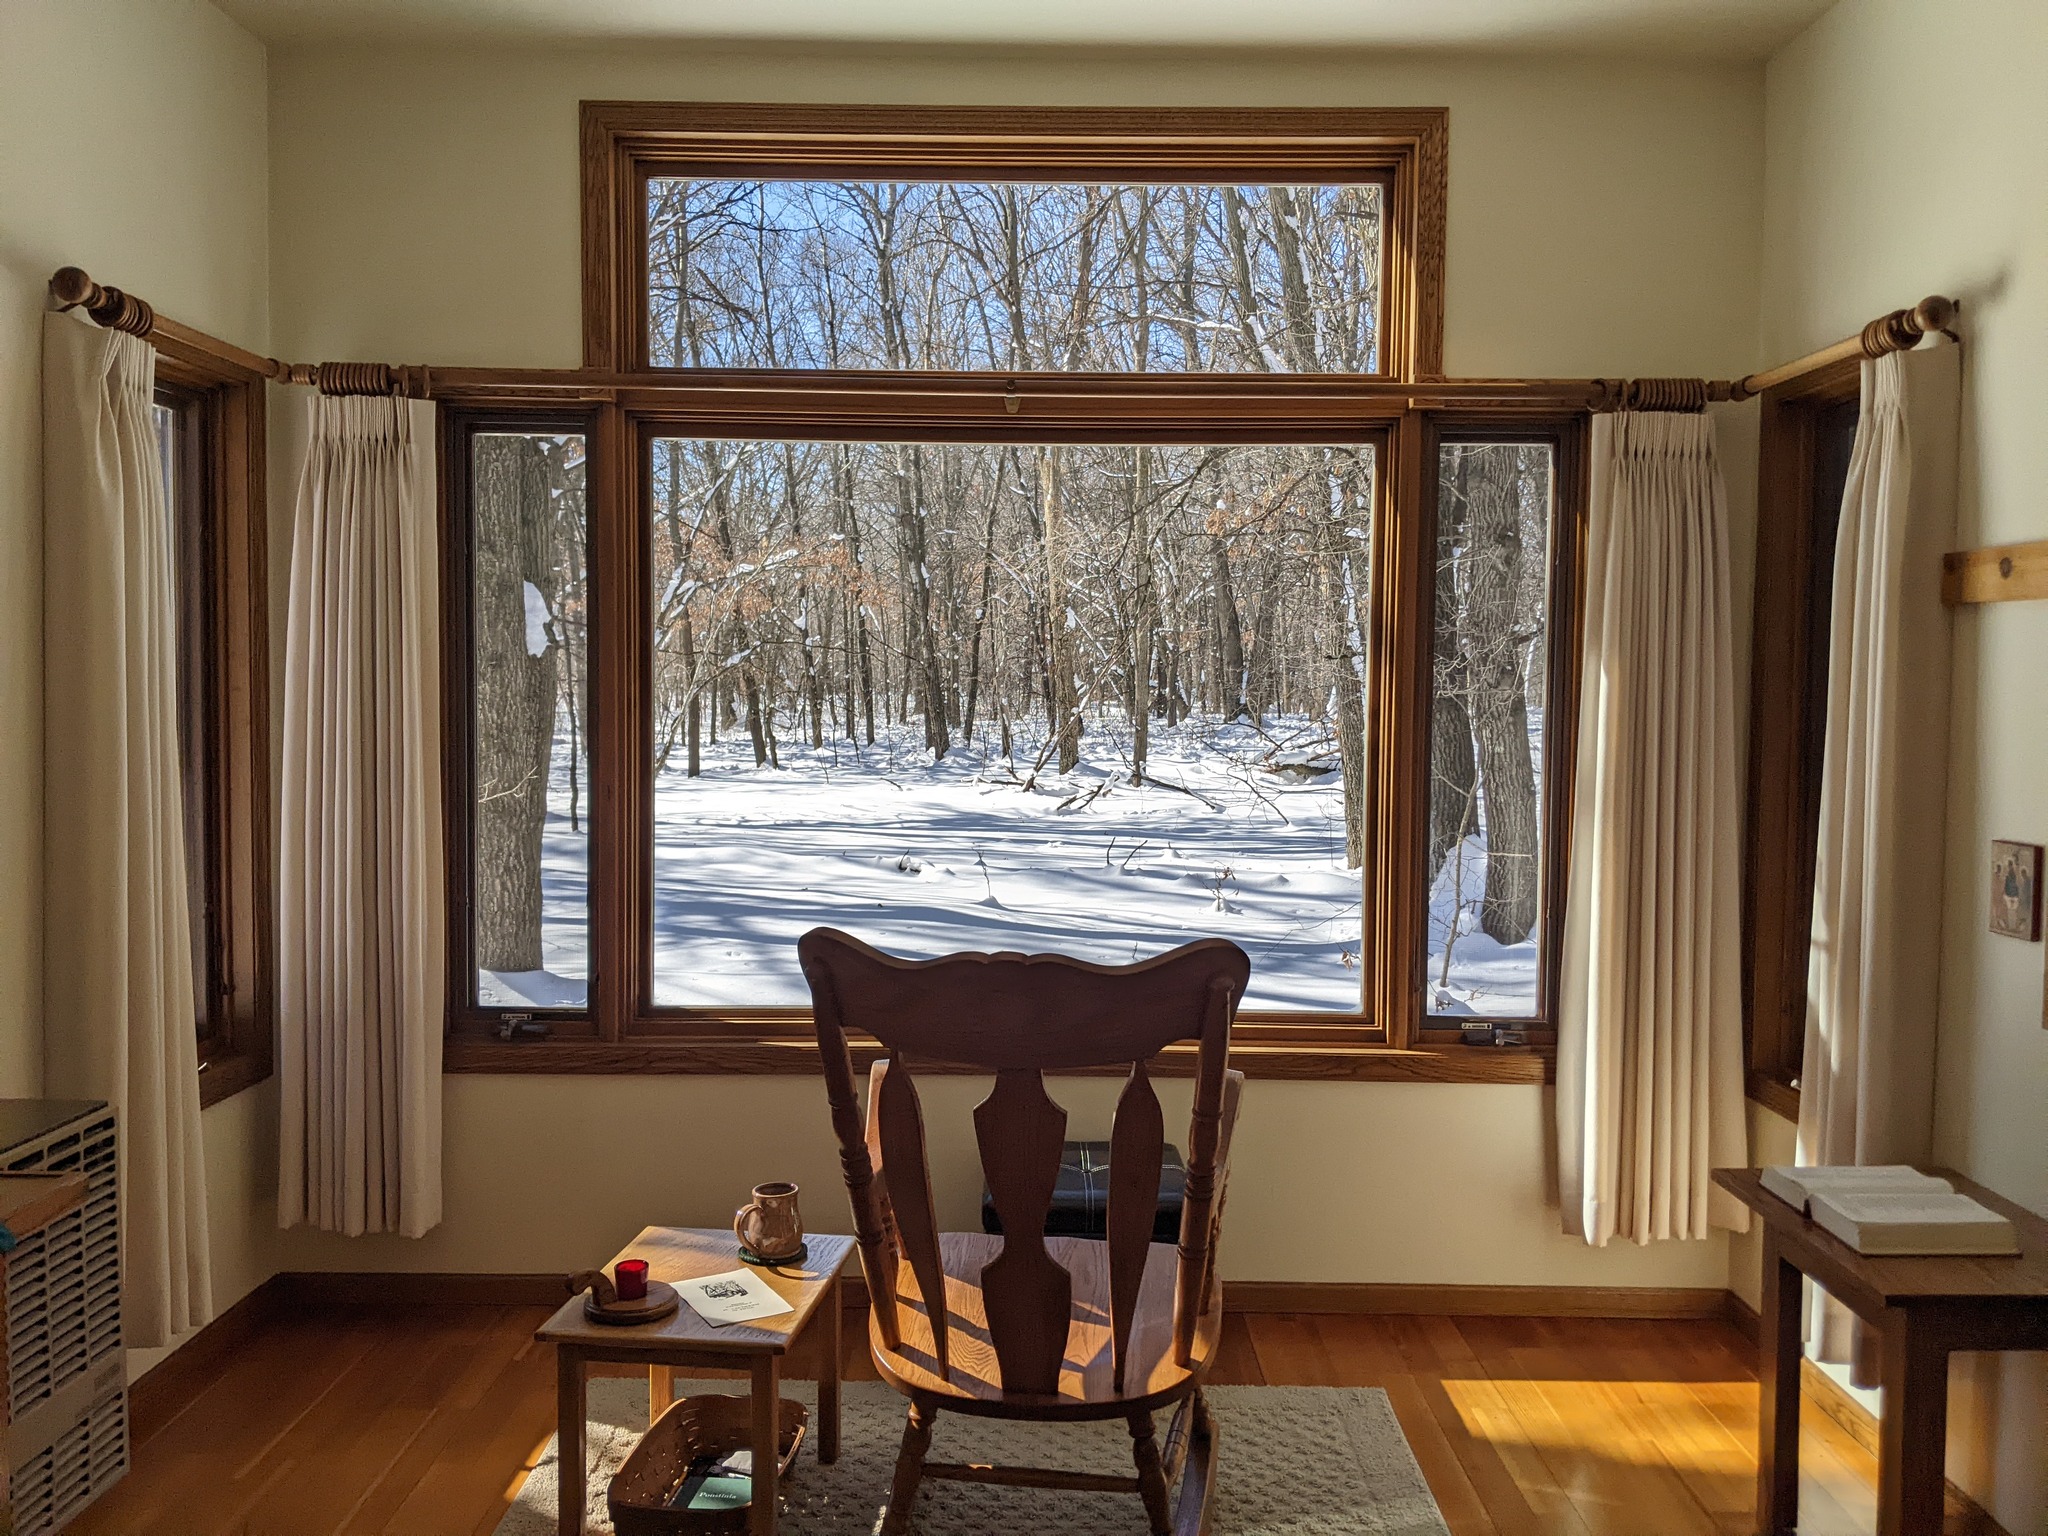 Empty wooden char facing a bright window surrounded by curtains looking out to a snowy scene.